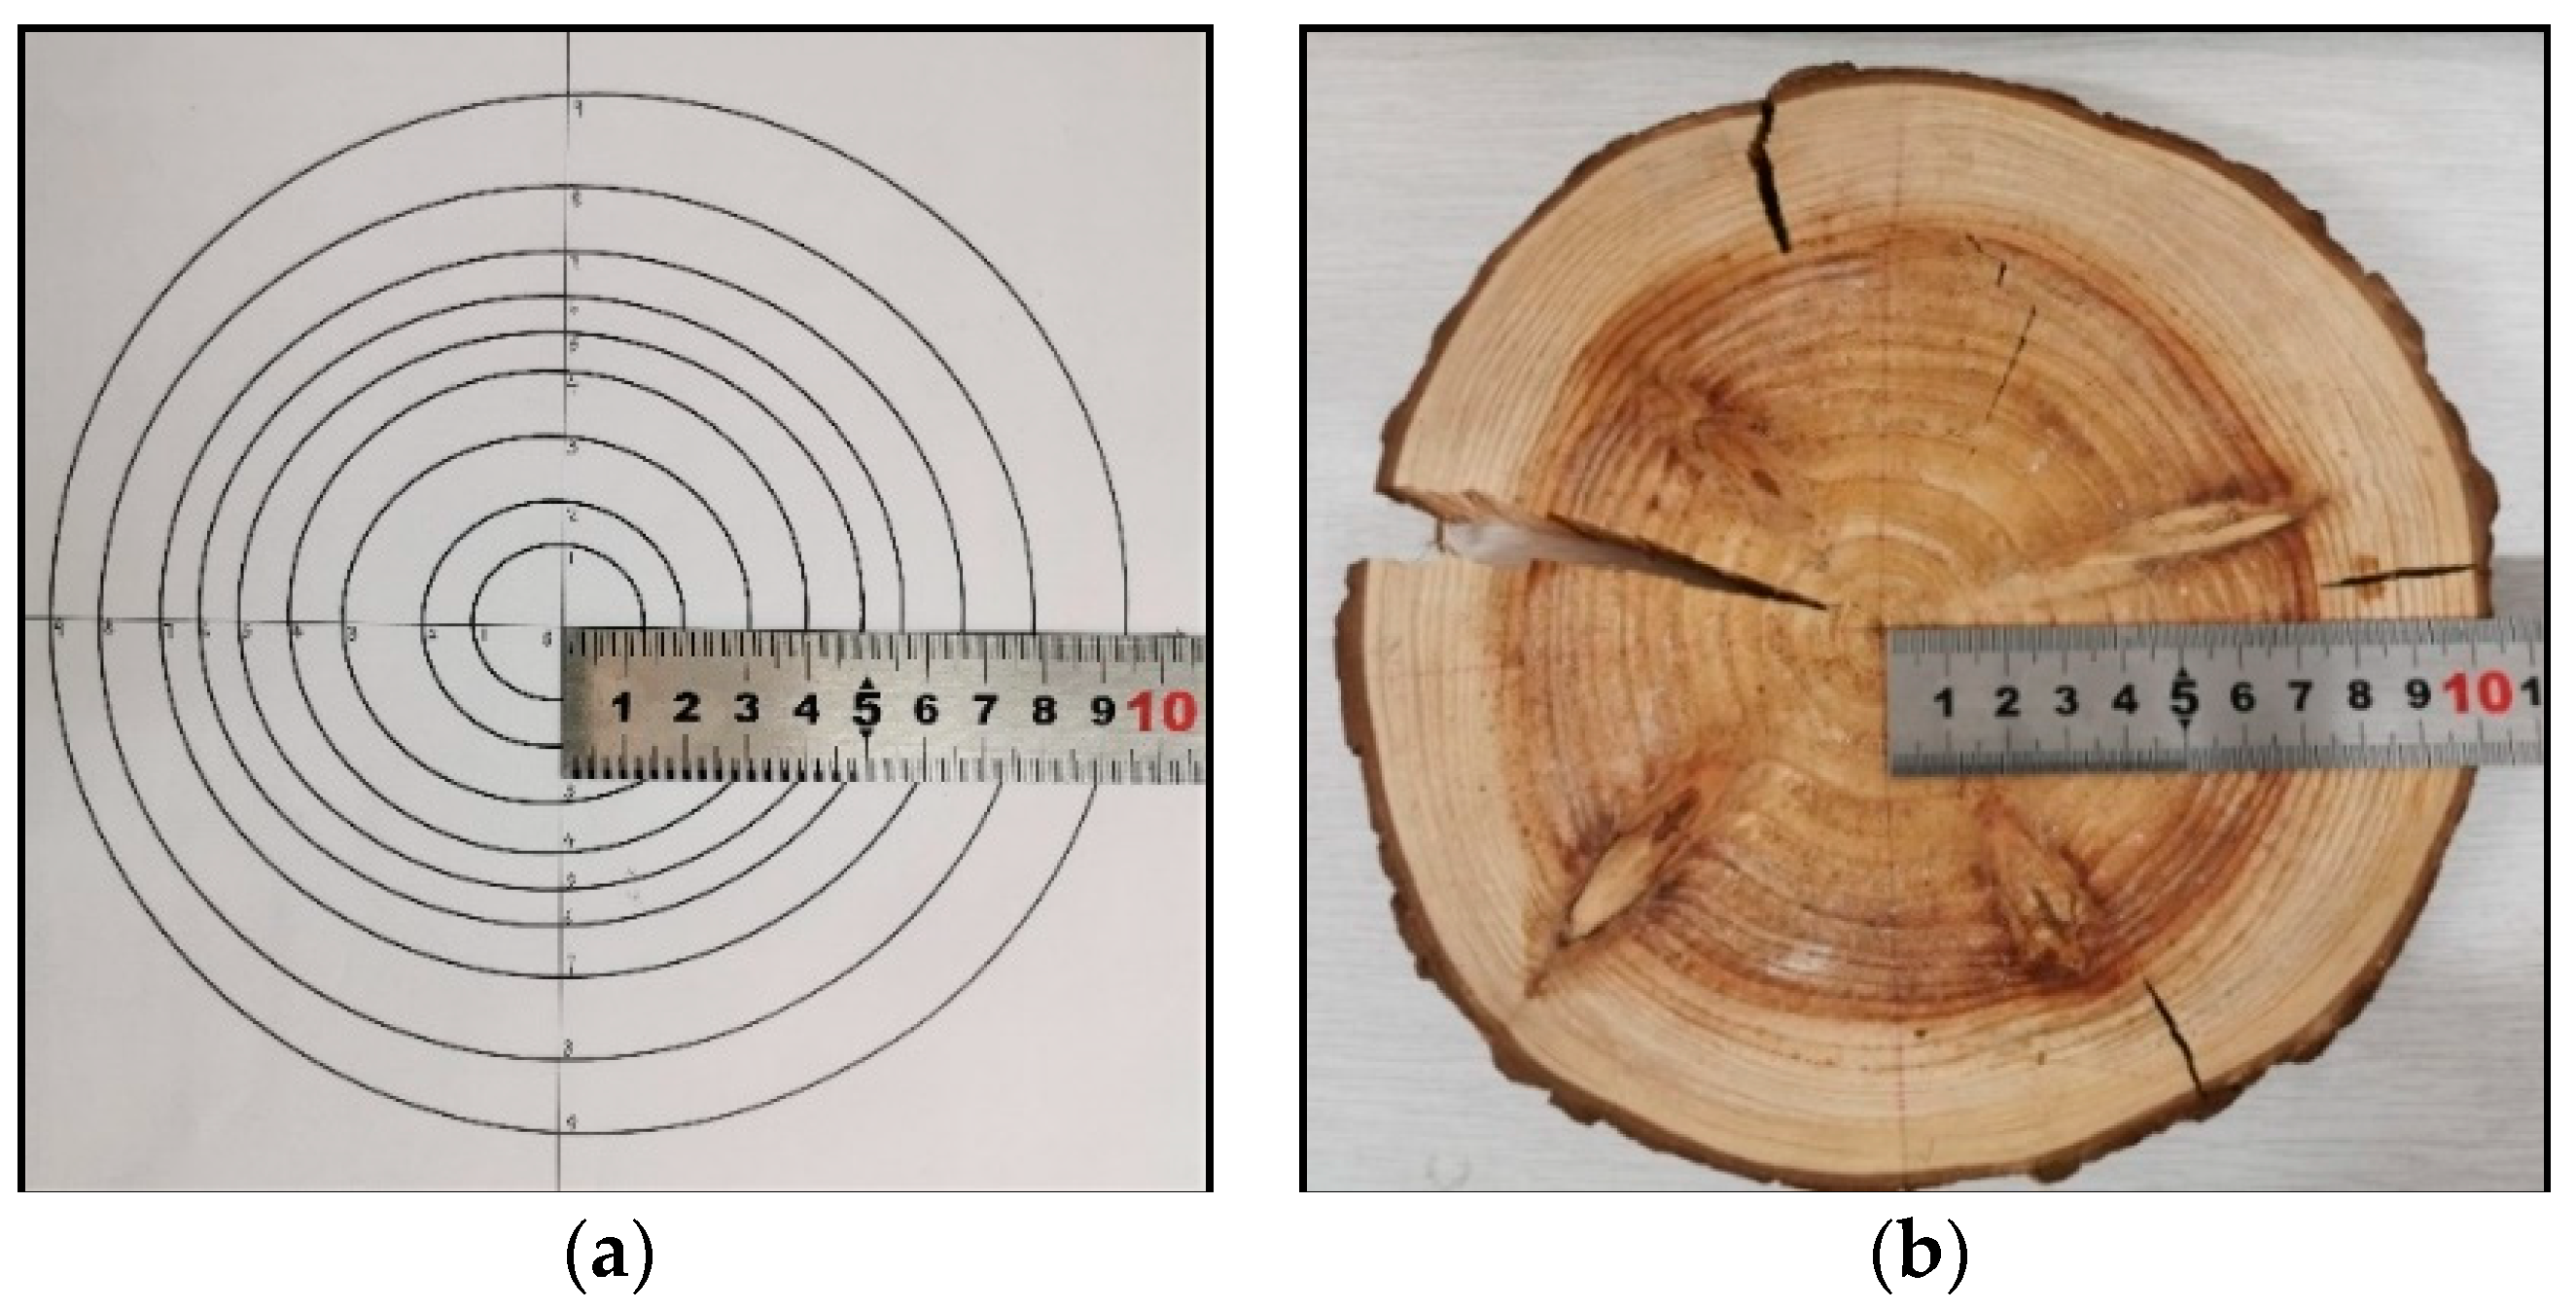 Solved] . Consider the diagram of tree rings shown. Let r represent the...  | Course Hero